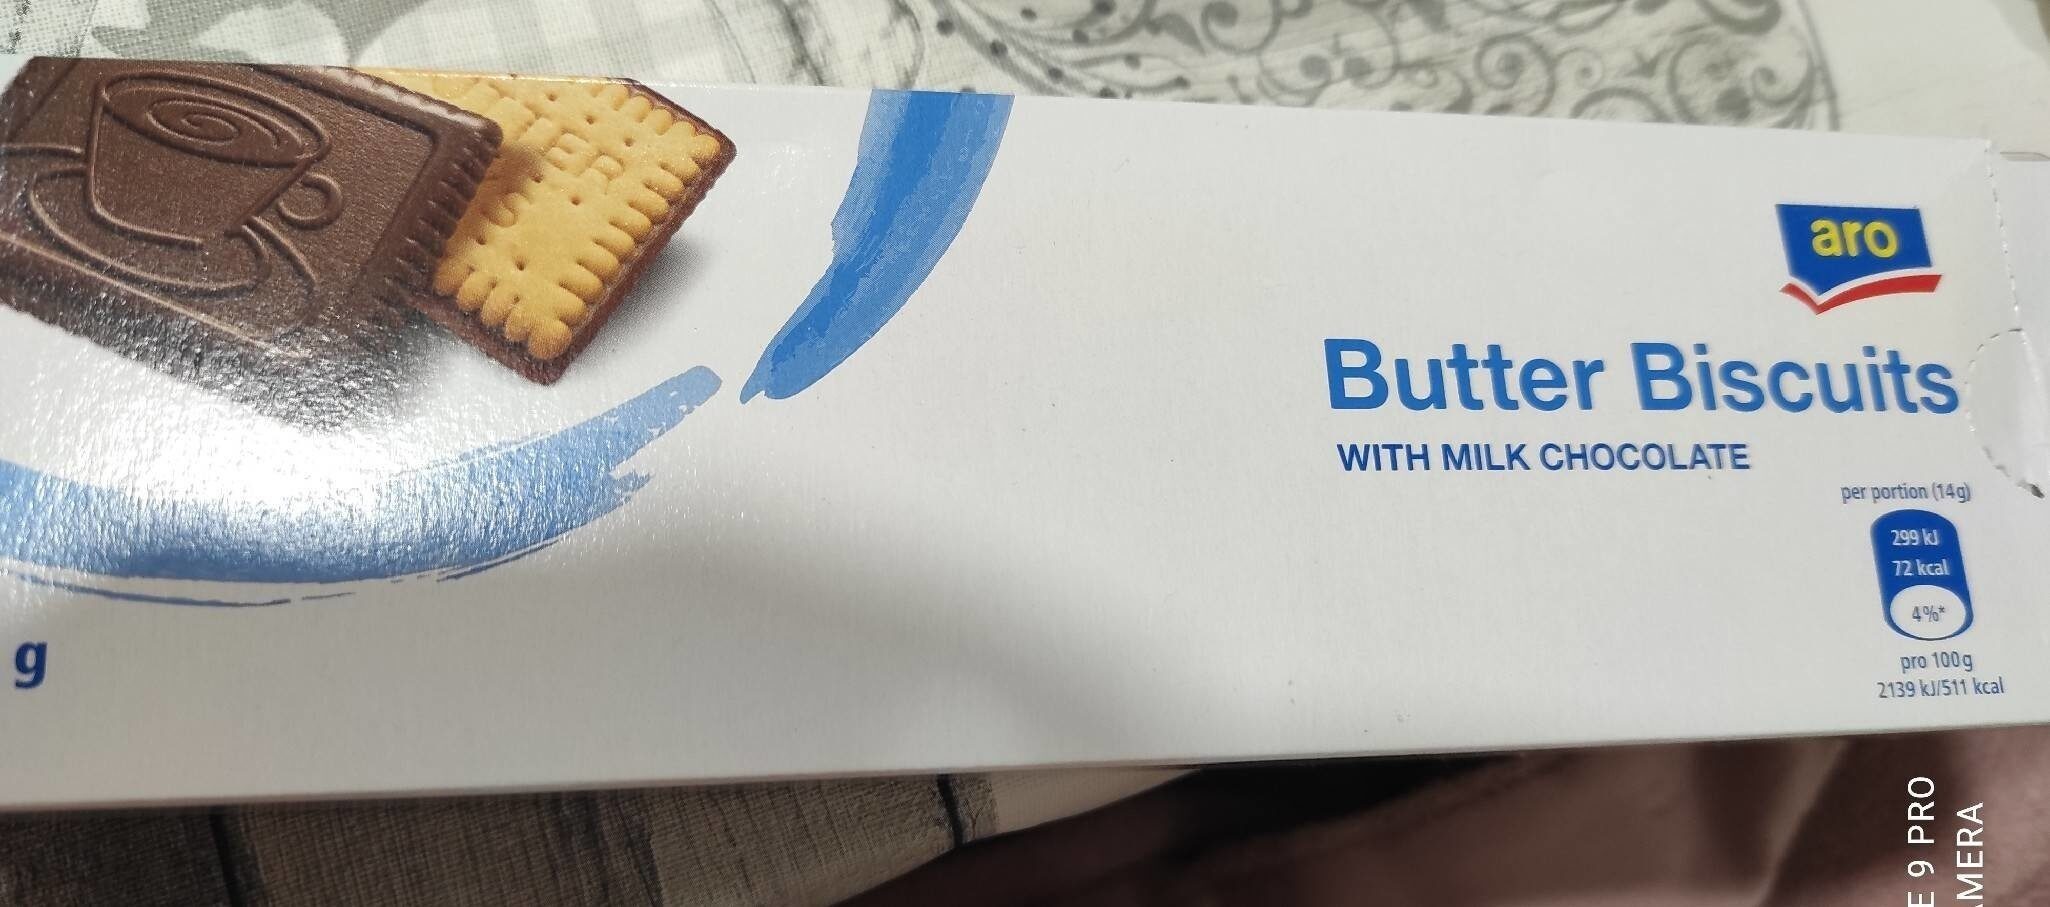 Butter biscuits - Product - de